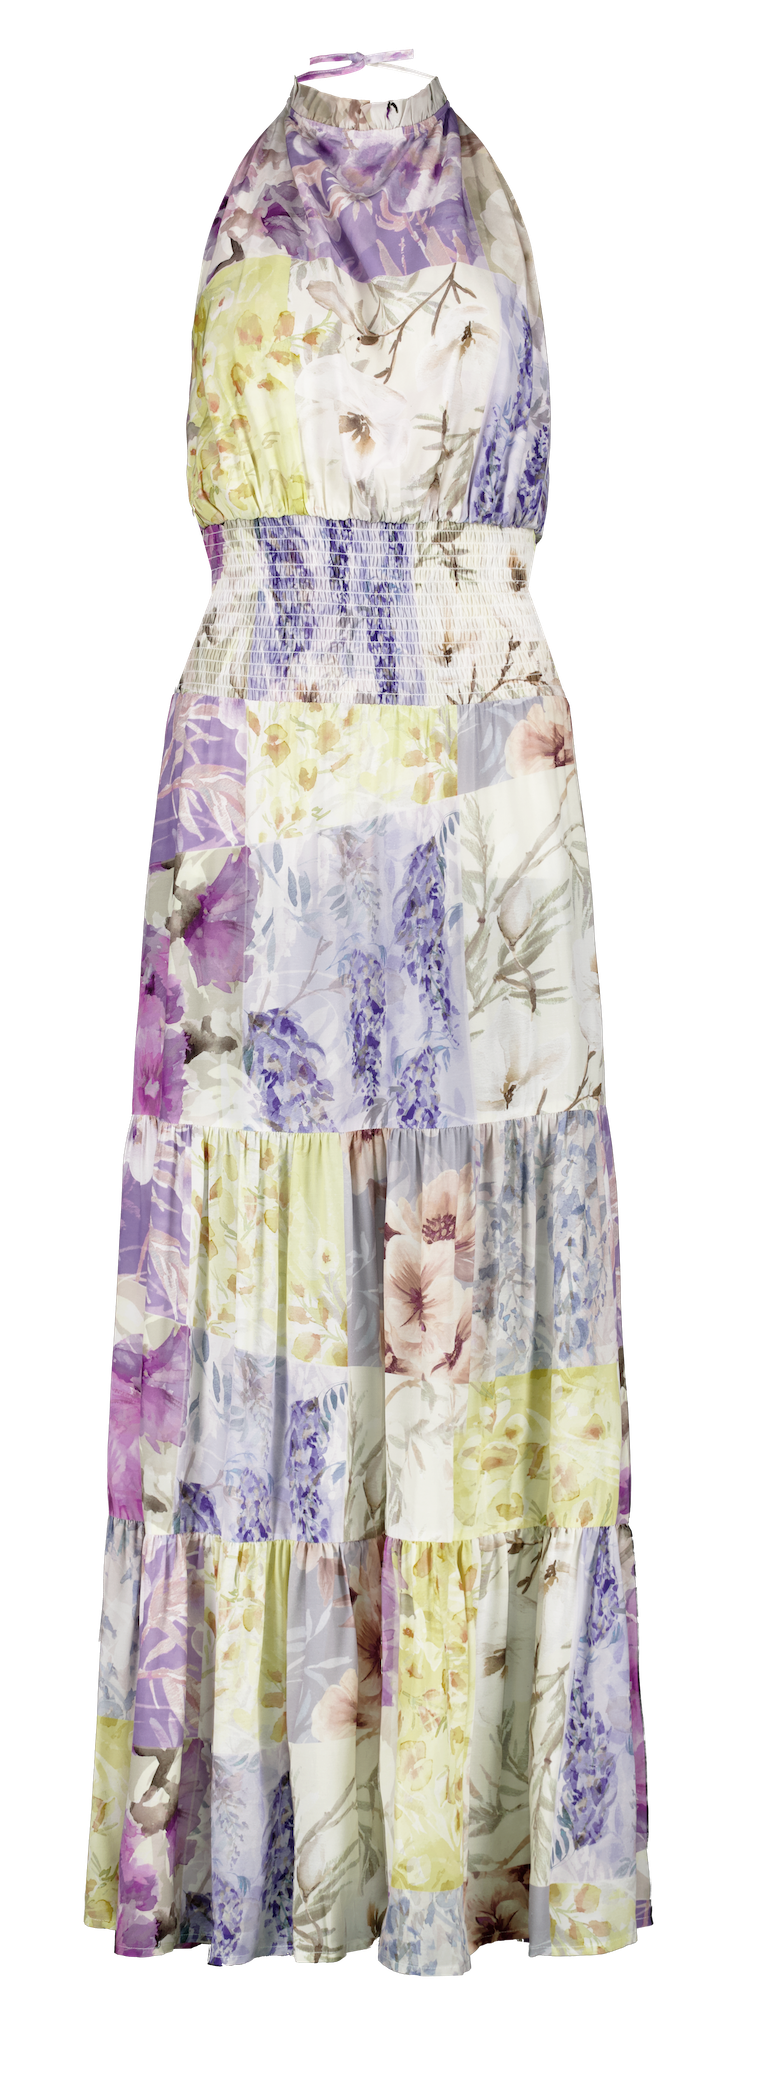 High neck ruffle tie backless dress with botanical print